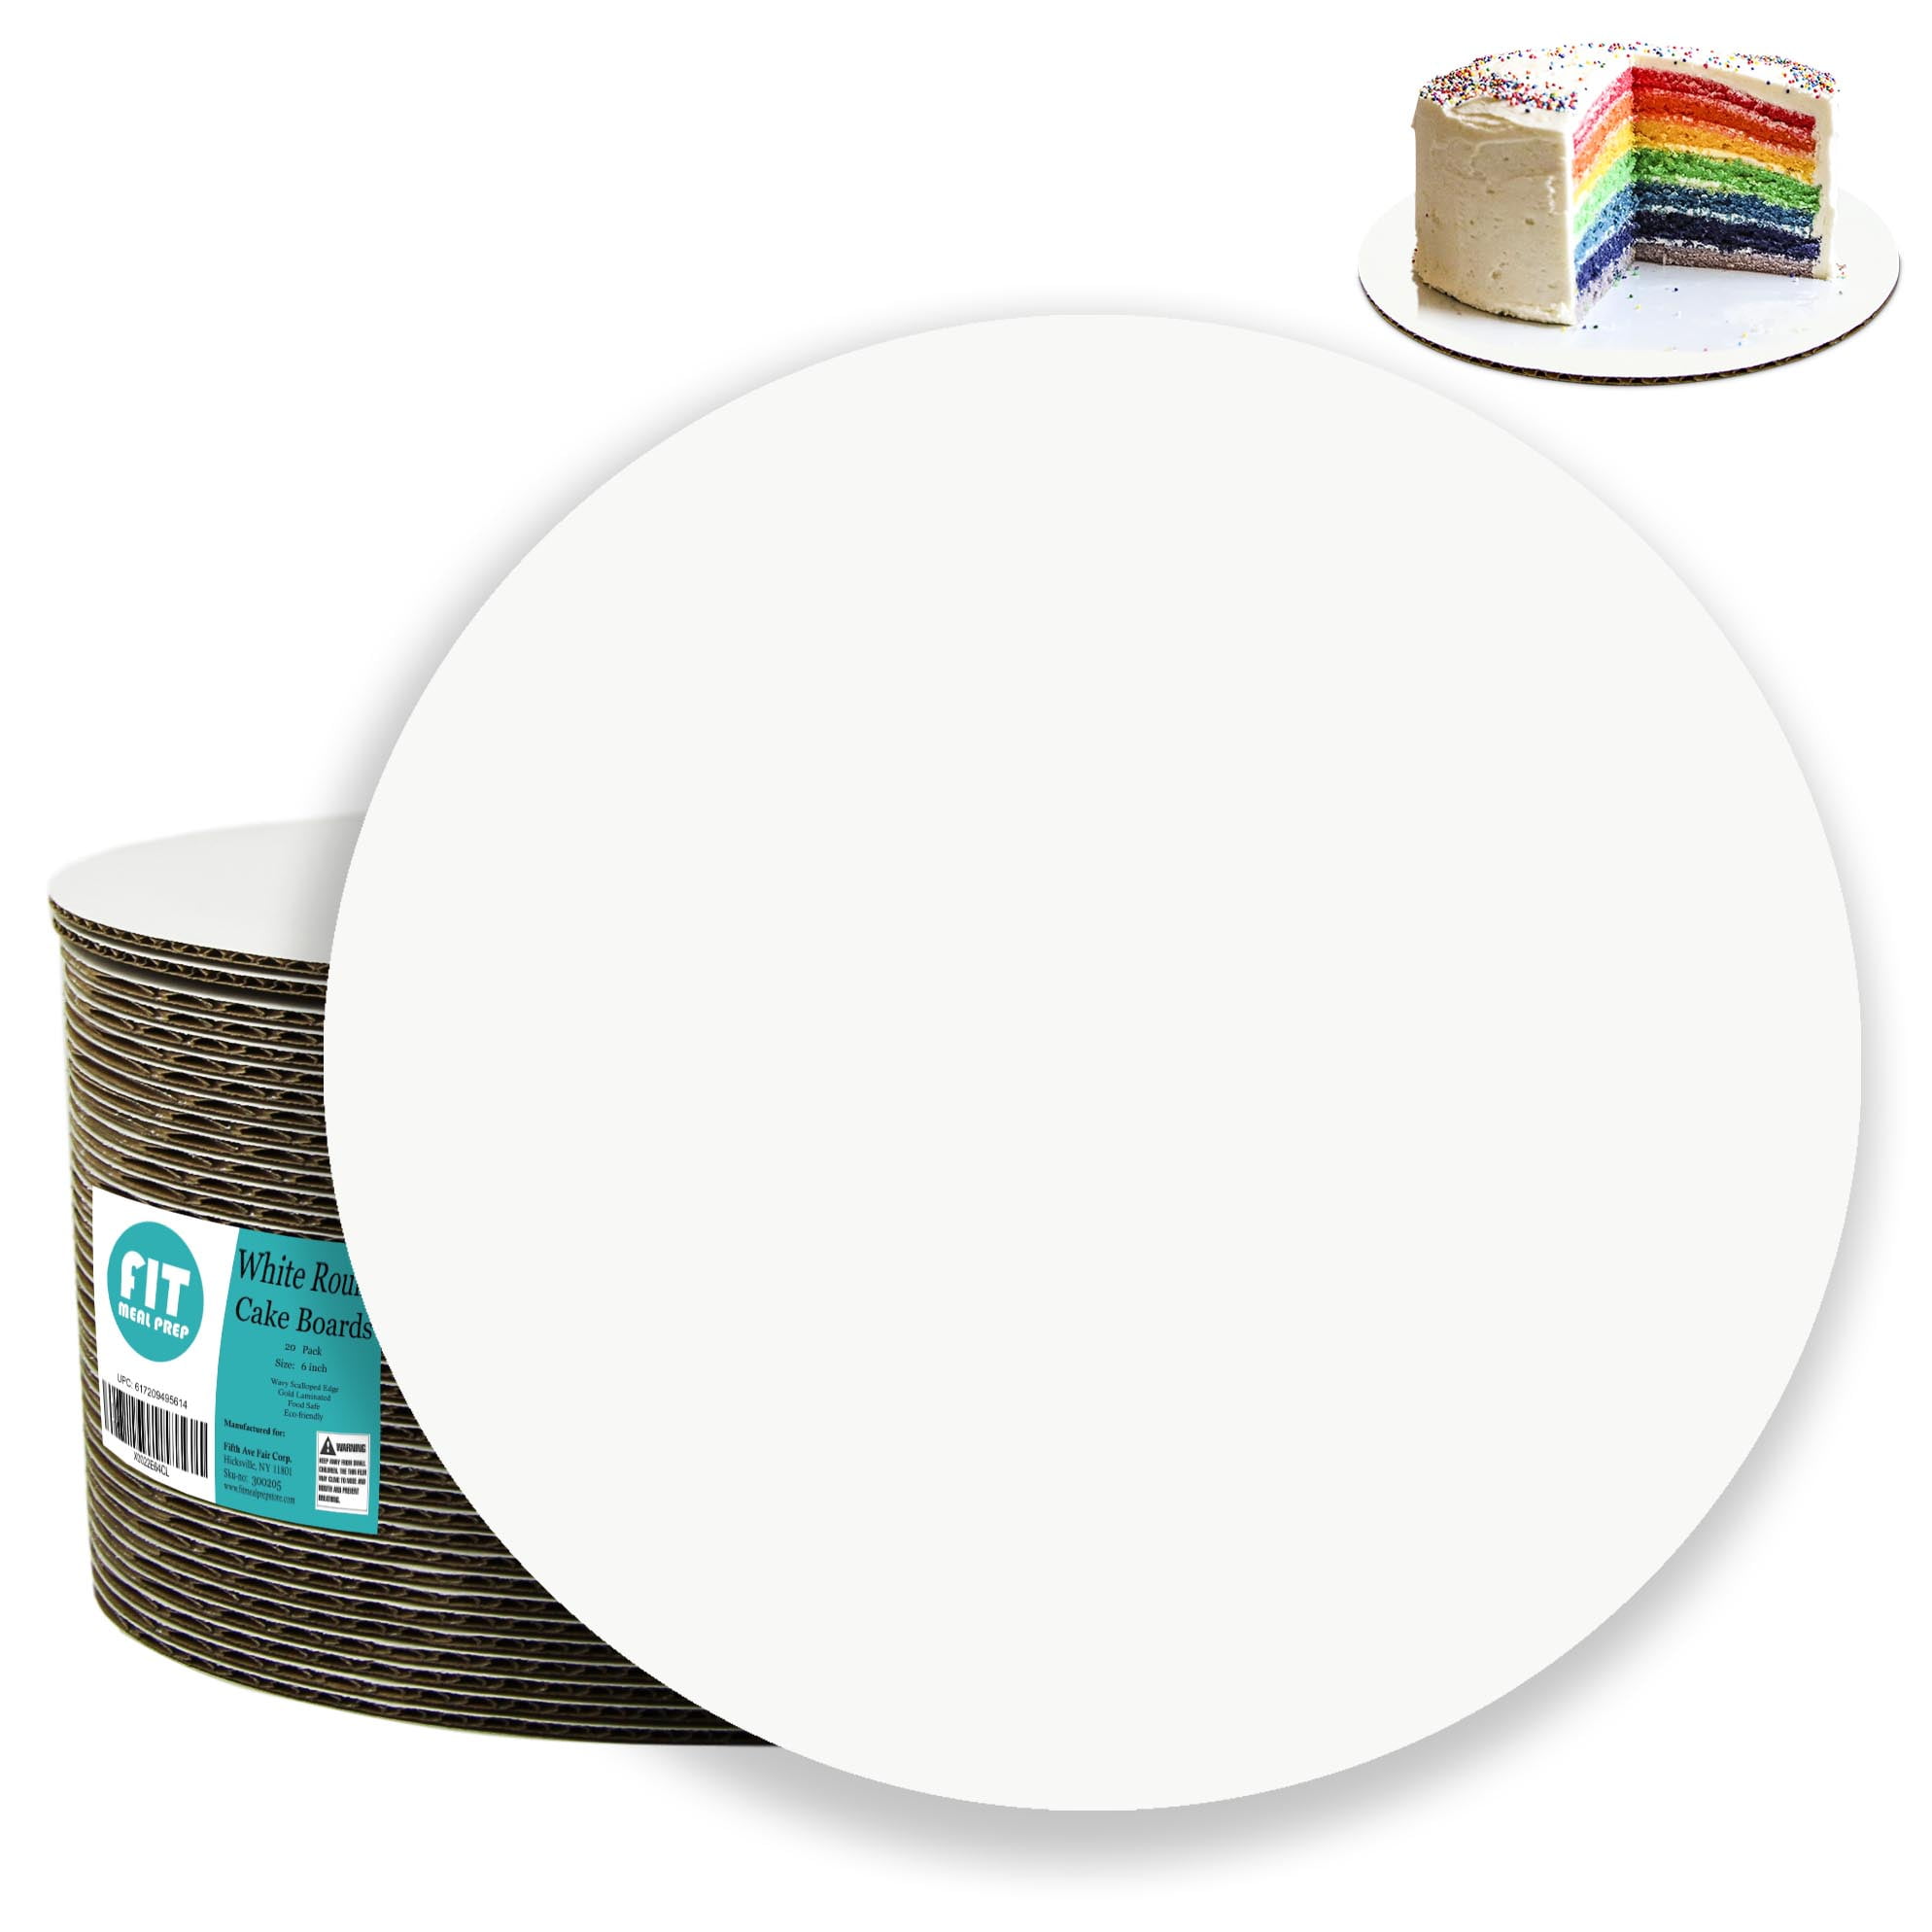 cake cardboard rounds Pizza and Cake Circle Cake Board Circles cake circles 7 inch 7 inch cake circles 7, Pack of 50